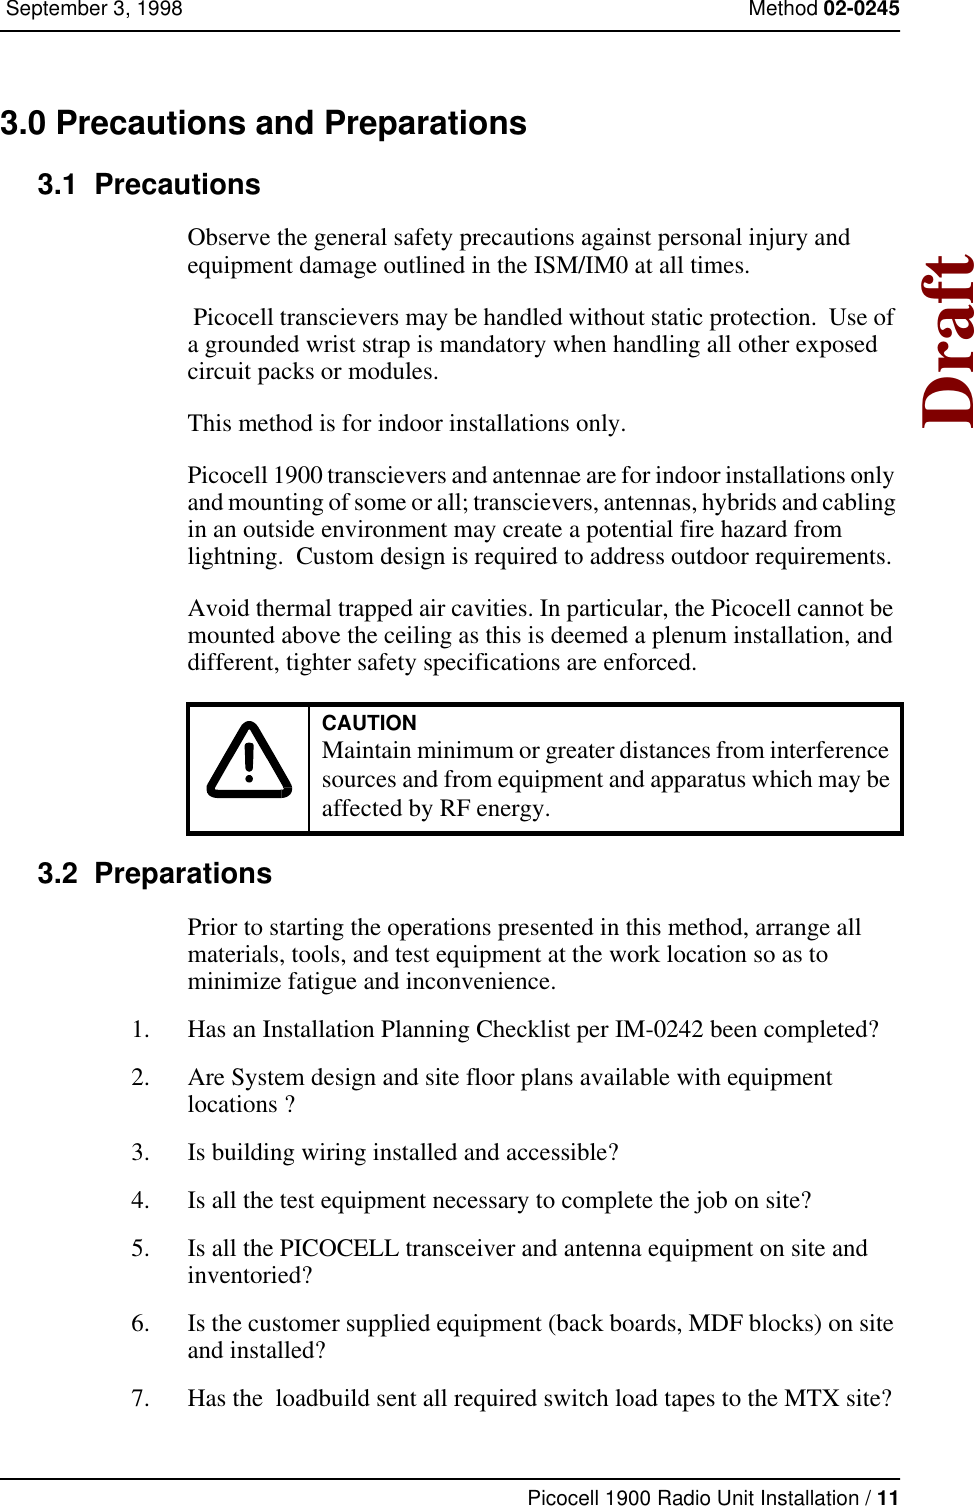 Picocell 1900 Radio Unit Installation / 11 September 3, 1998 Method 02-0245Draft3.0 Precautions and Preparations 3.1  PrecautionsObserve the general safety precautions against personal injury and equipment damage outlined in the ISM/IM0 at all times. Picocell transcievers may be handled without static protection.  Use of a grounded wrist strap is mandatory when handling all other exposed circuit packs or modules.This method is for indoor installations only.Picocell 1900 transcievers and antennae are for indoor installations only and mounting of some or all; transcievers, antennas, hybrids and cabling in an outside environment may create a potential fire hazard from lightning.  Custom design is required to address outdoor requirements.Avoid thermal trapped air cavities. In particular, the Picocell cannot be mounted above the ceiling as this is deemed a plenum installation, and different, tighter safety specifications are enforced.3.2  PreparationsPrior to starting the operations presented in this method, arrange all materials, tools, and test equipment at the work location so as to minimize fatigue and inconvenience.1. Has an Installation Planning Checklist per IM-0242 been completed?2. Are System design and site floor plans available with equipment locations ?3. Is building wiring installed and accessible?4. Is all the test equipment necessary to complete the job on site?5. Is all the PICOCELL transceiver and antenna equipment on site and inventoried?6. Is the customer supplied equipment (back boards, MDF blocks) on site and installed?  7. Has the  loadbuild sent all required switch load tapes to the MTX site?CAUTIONMaintain minimum or greater distances from interferencesources and from equipment and apparatus which may beaffected by RF energy. 